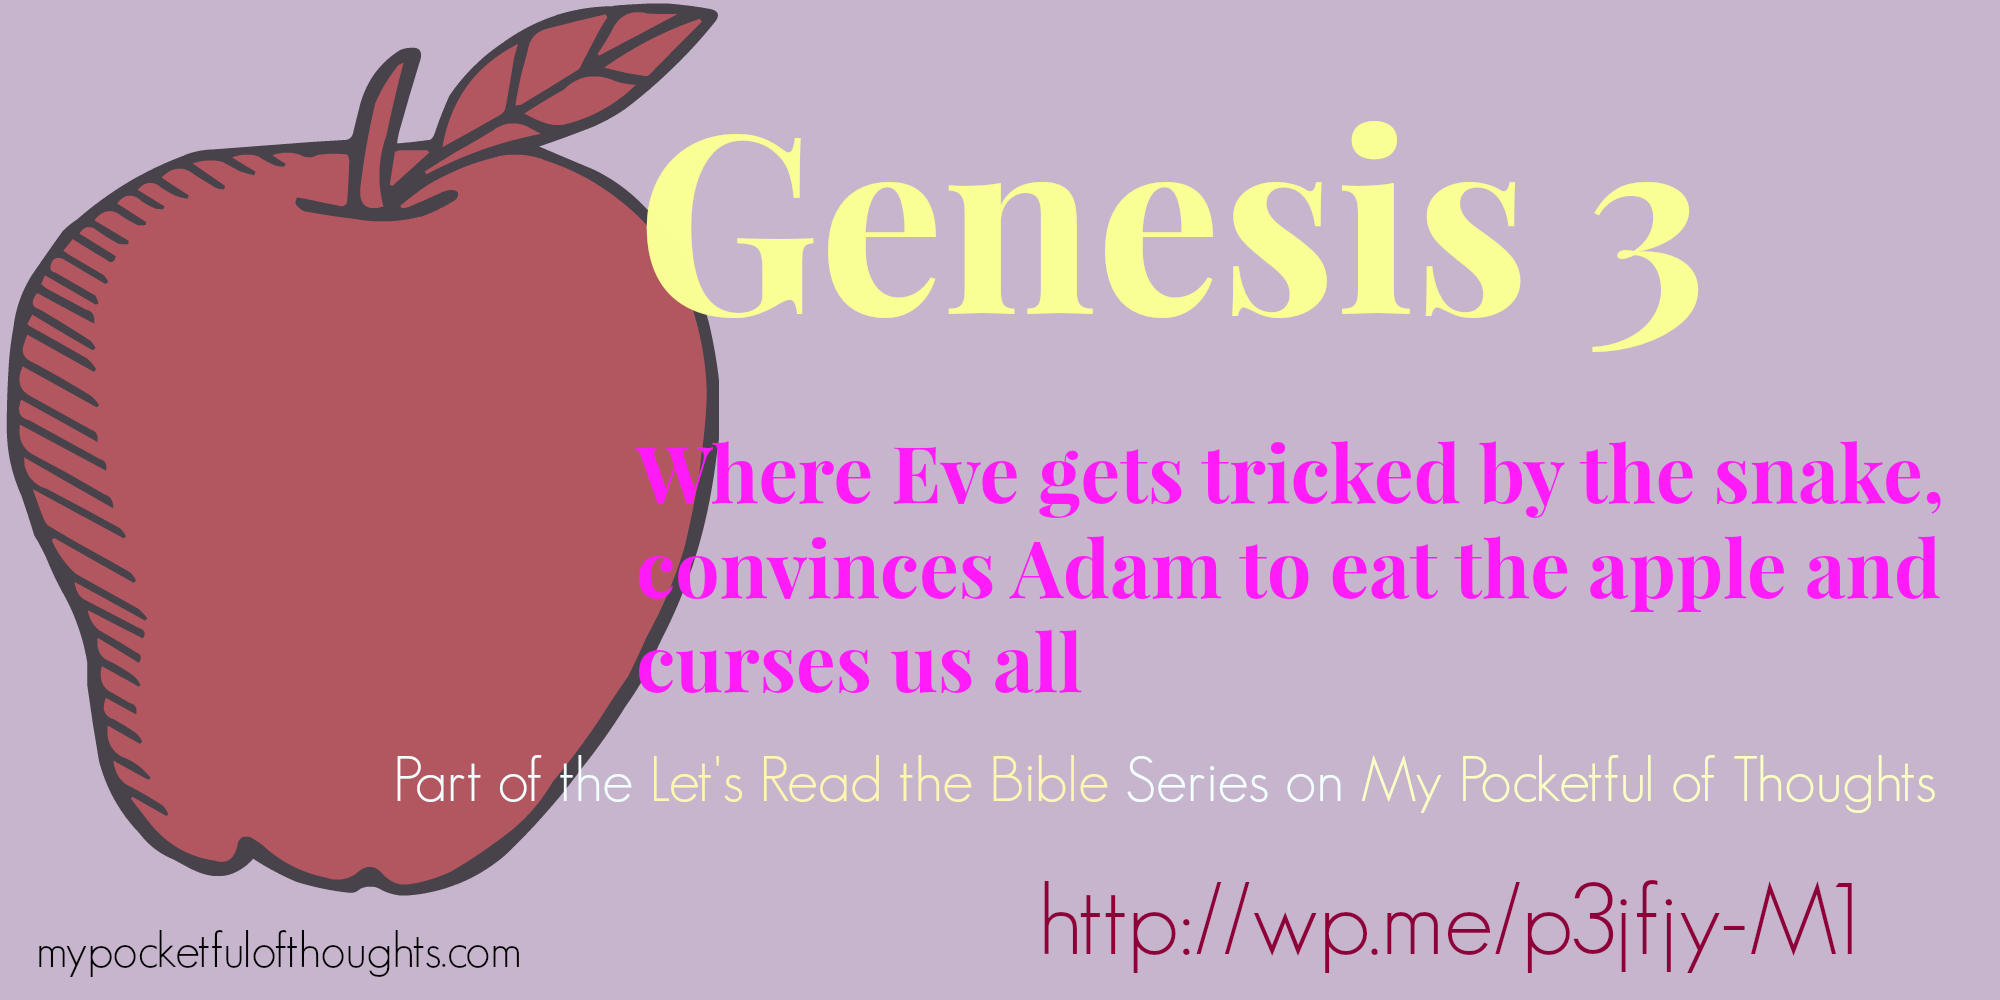 #Genesis 3 - Let's Read the #Bible Together with My Pocketful of Thoughts, Every Sunday  http://wp.me/p3jfjy-M1